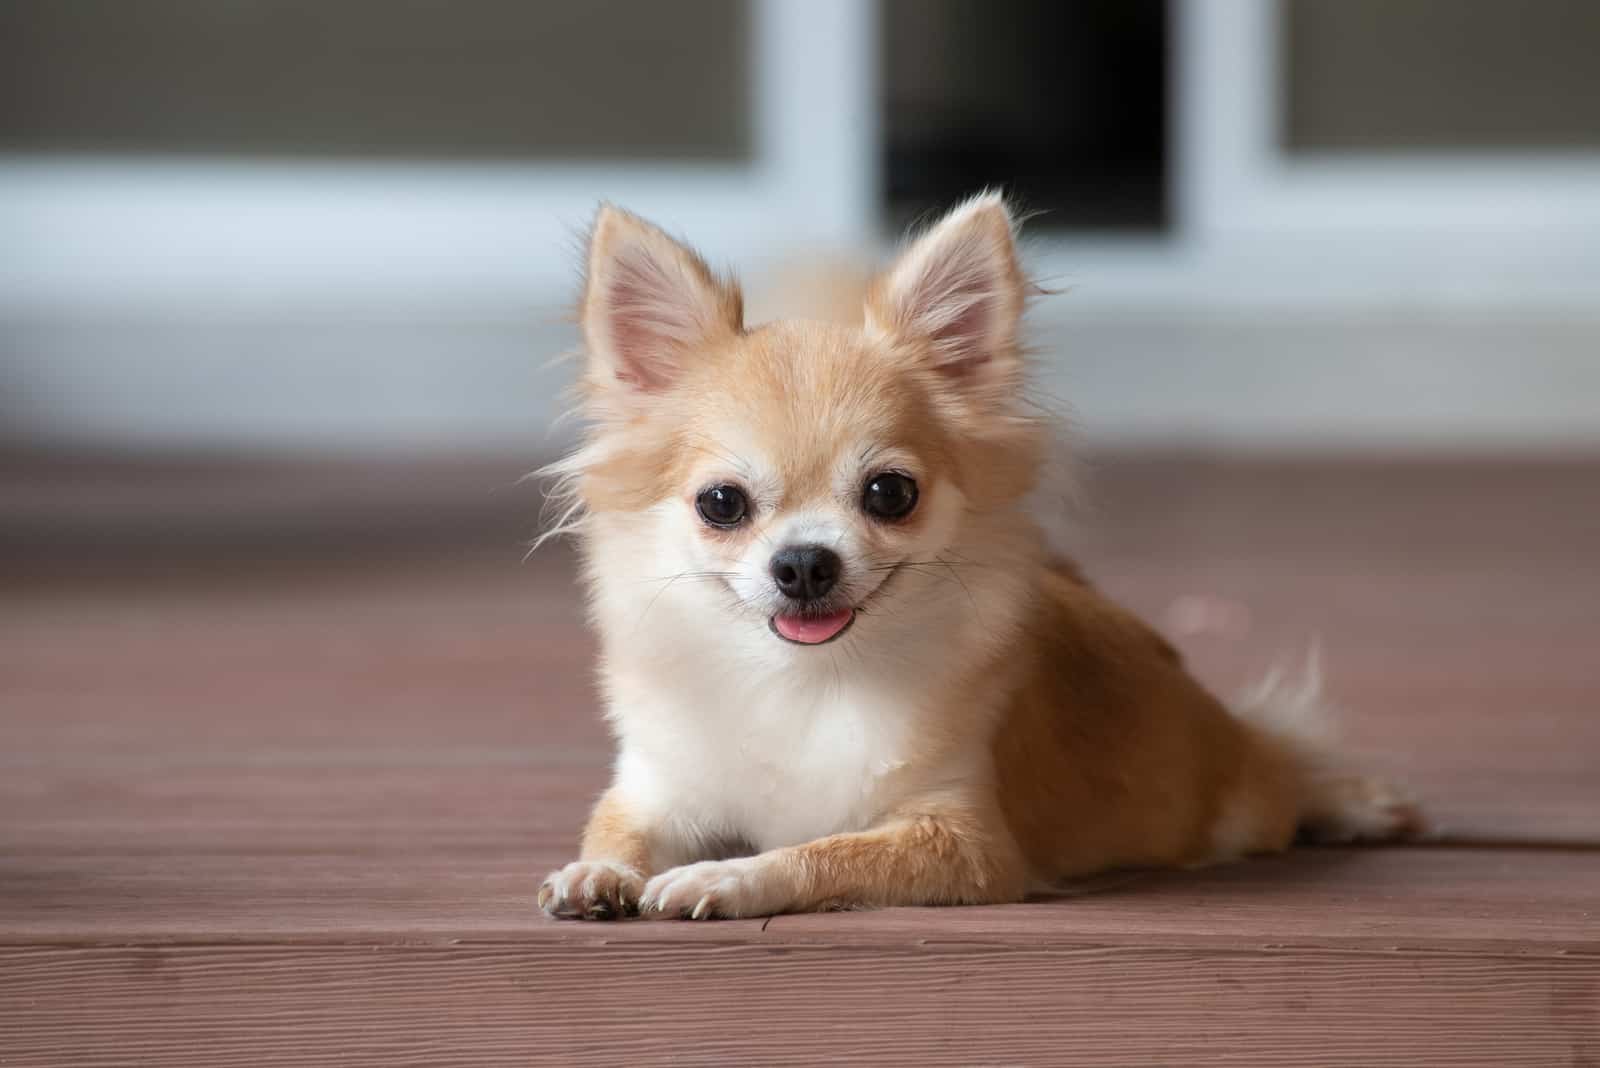 Chihuahua dog lying on the floor